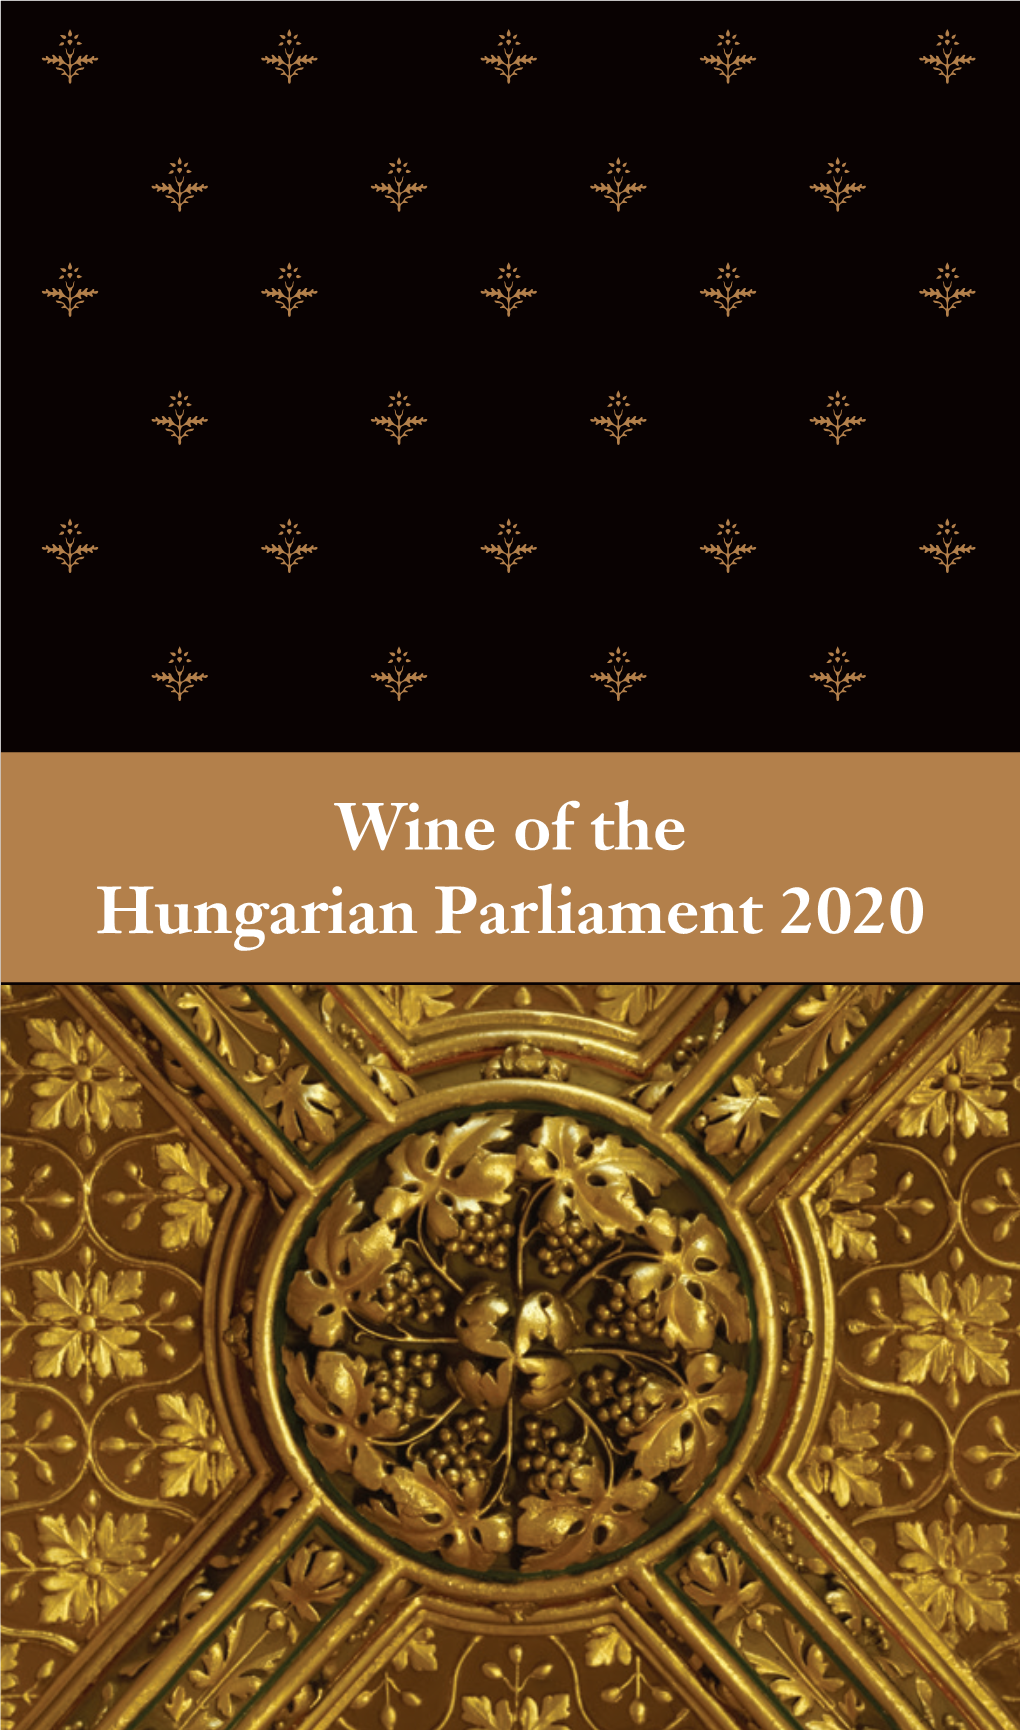 Wine of the Hungarian Parliament 2020 Wine of the Hungarian Parliament 2020 Dear Reader